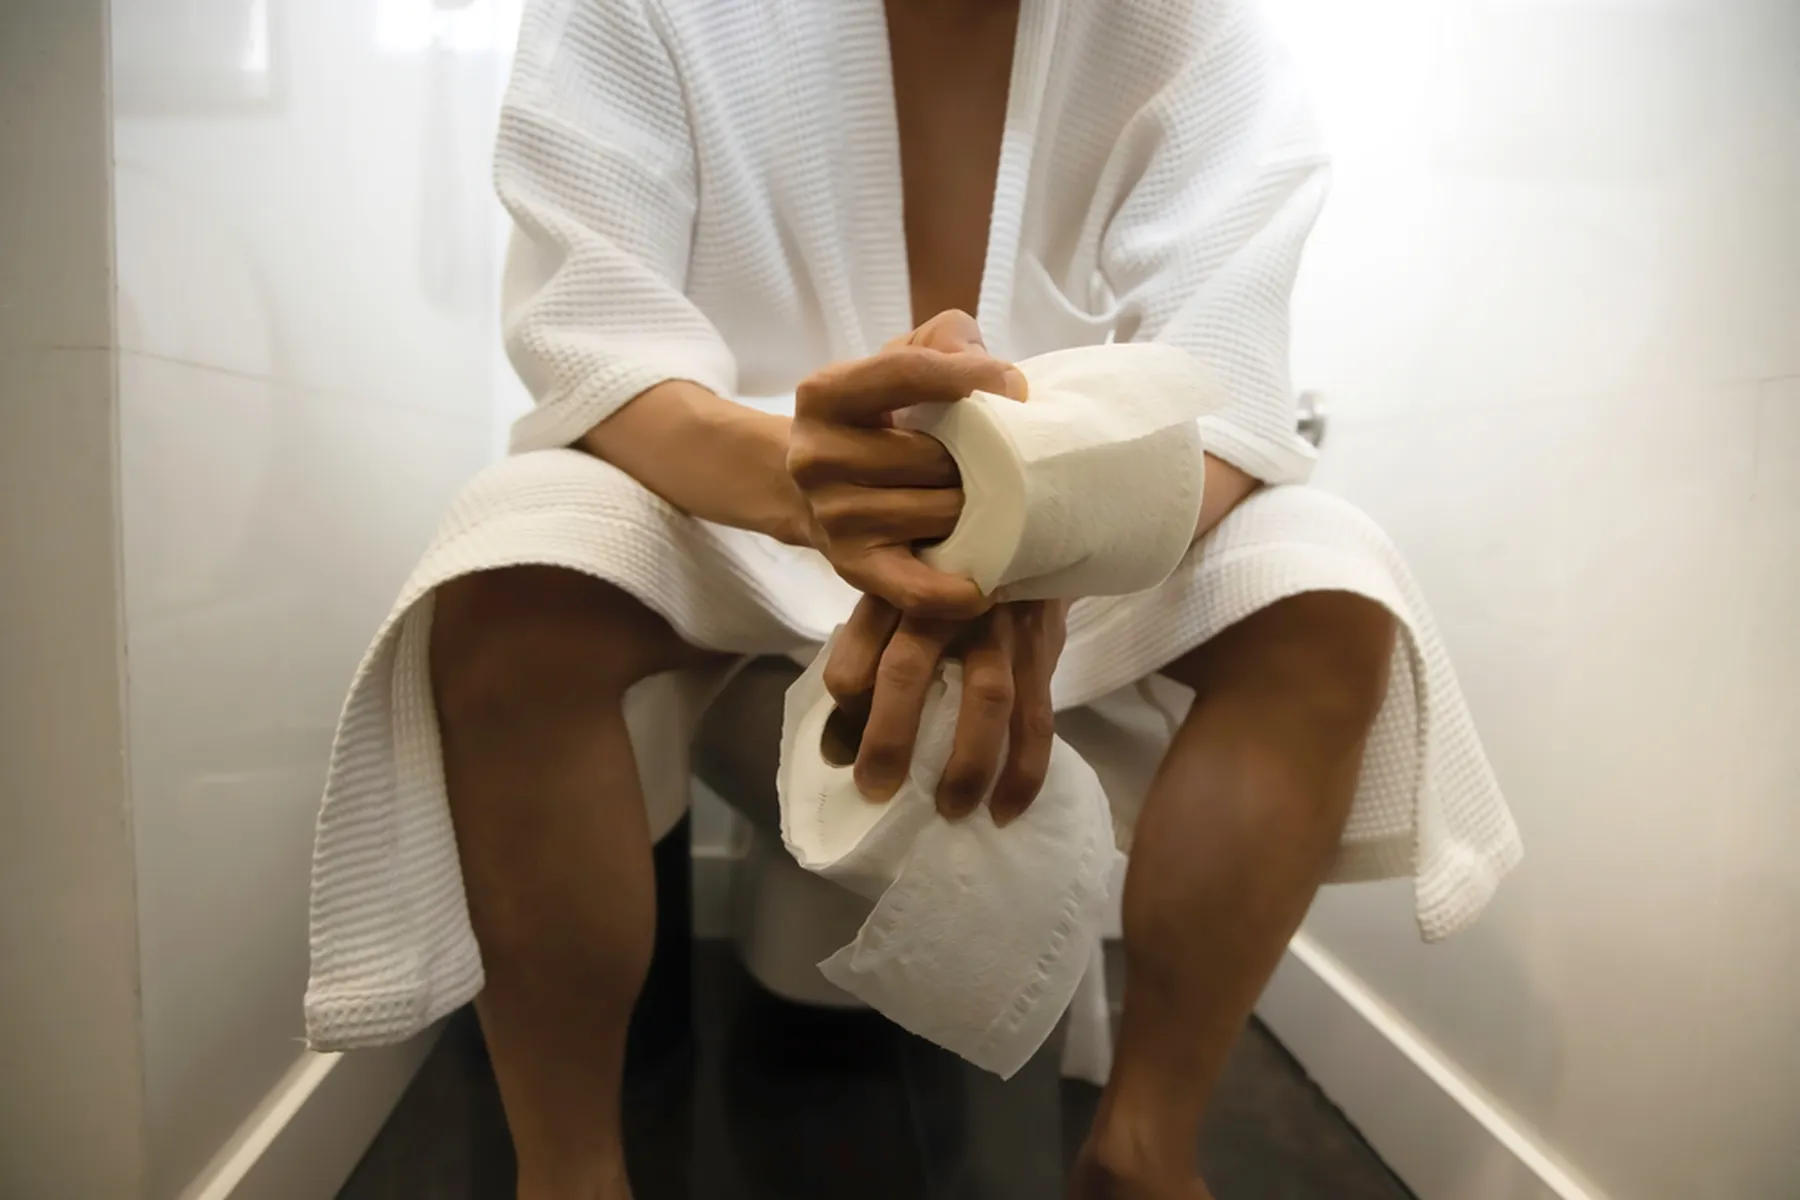 Man sitting on toilet in robe holding toilet paper.